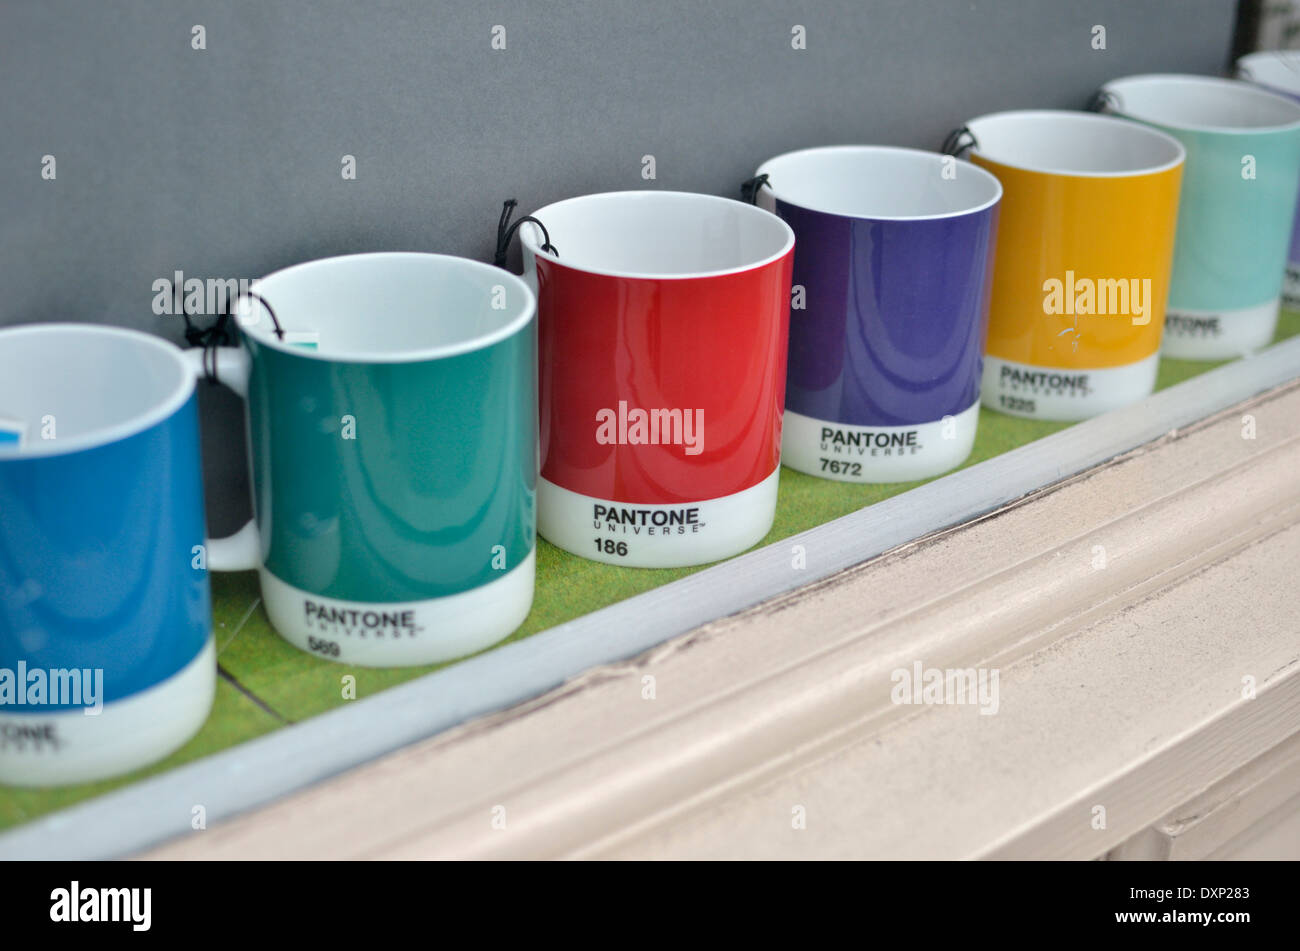 Pantone Matching System (PMS) colours on mugs in a shop window Stock Photo